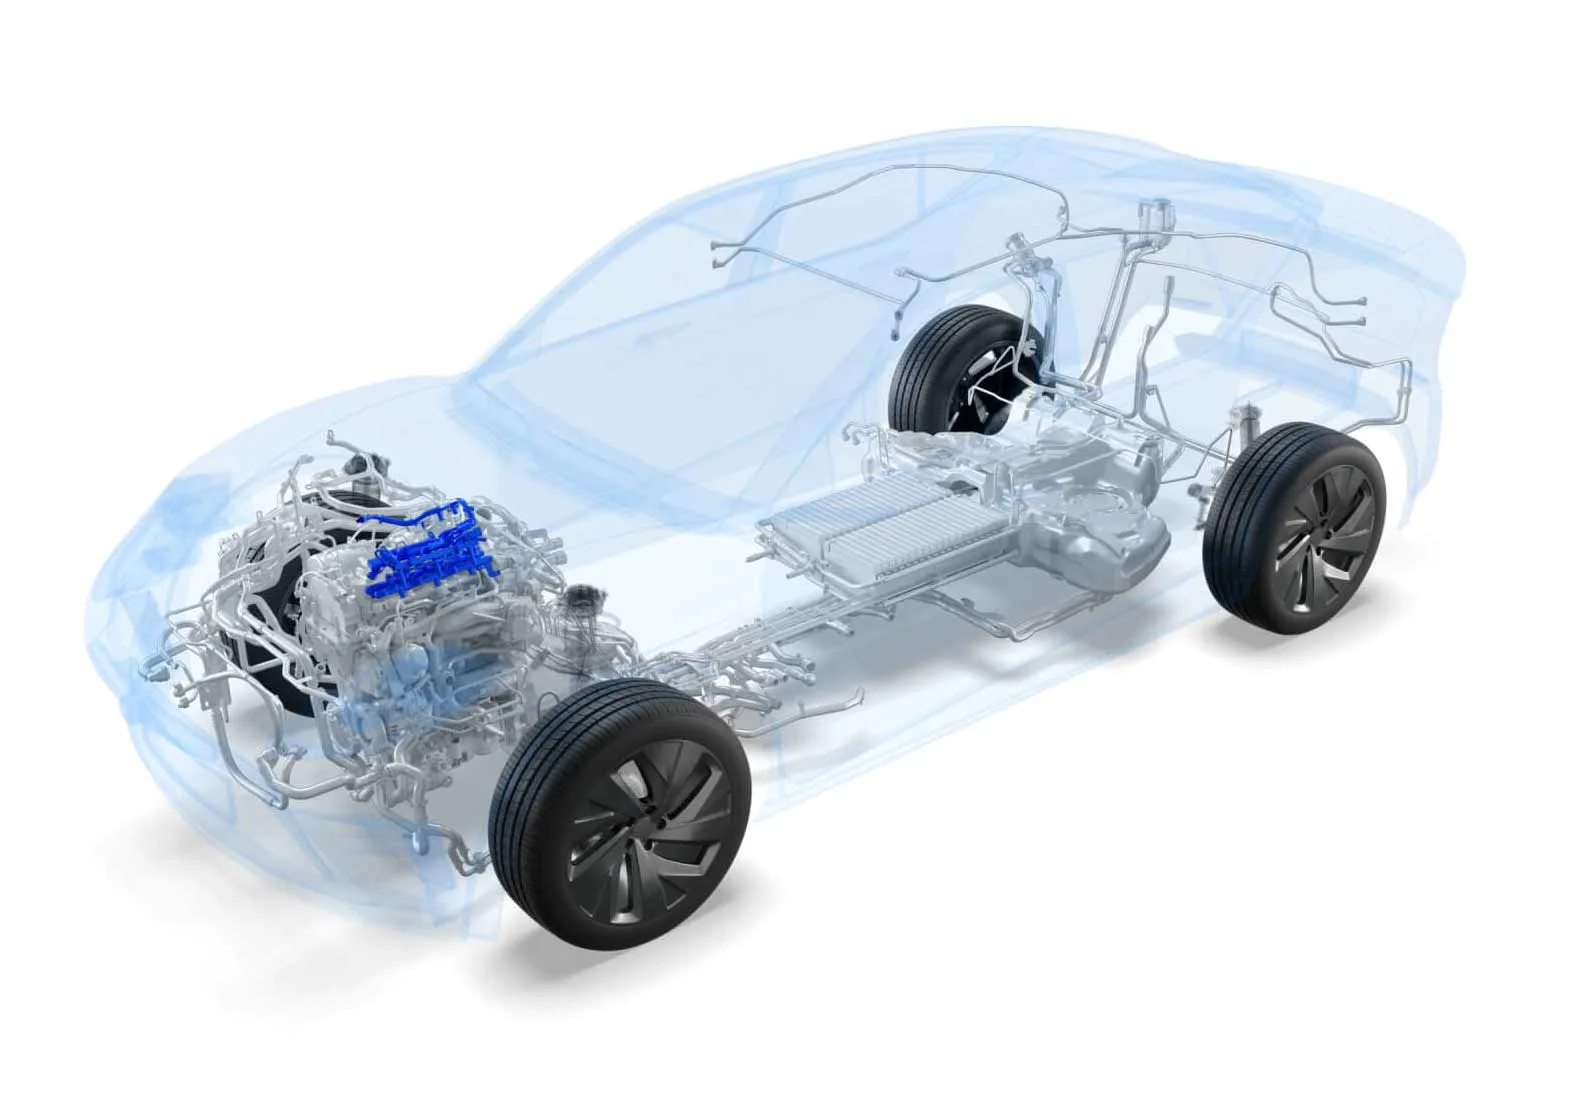 Ghost car with powertrain products highlighted